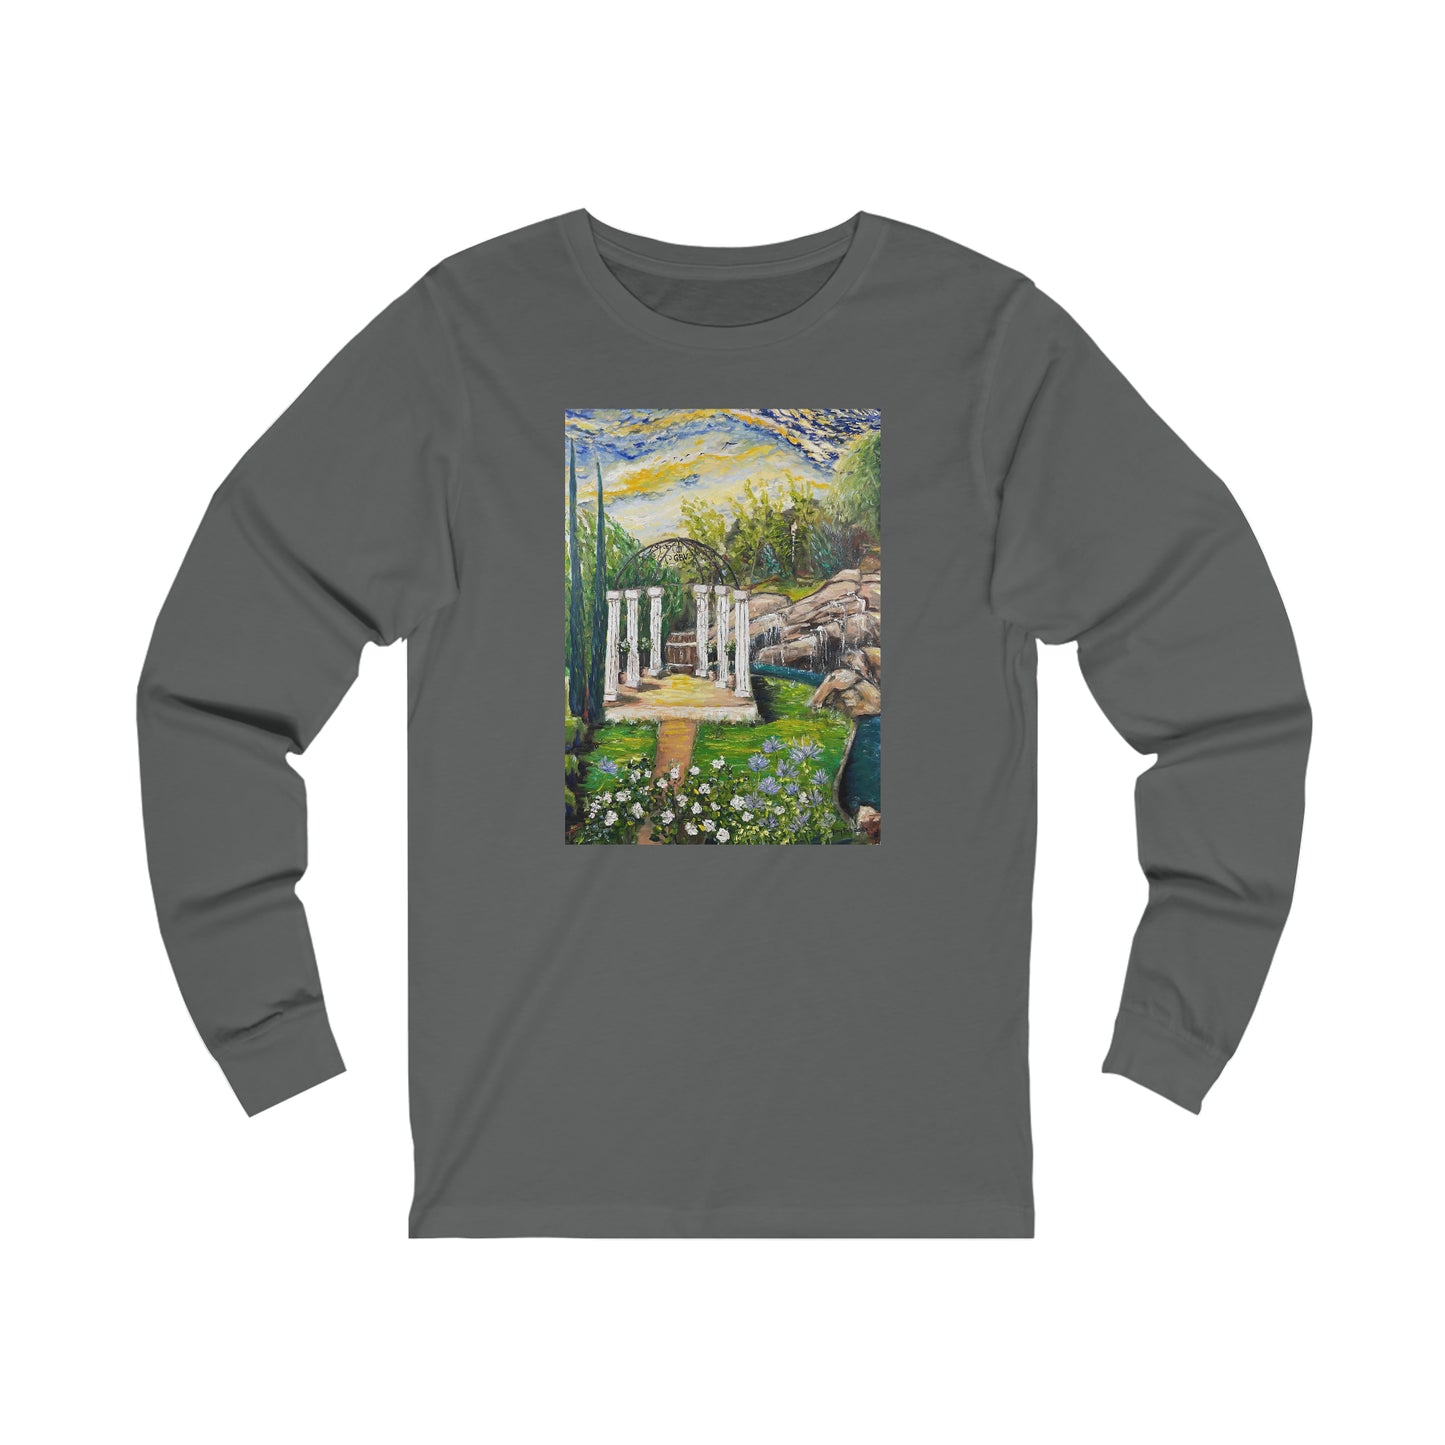 The Pergola at GBV Unisex Jersey Long Sleeve Tee